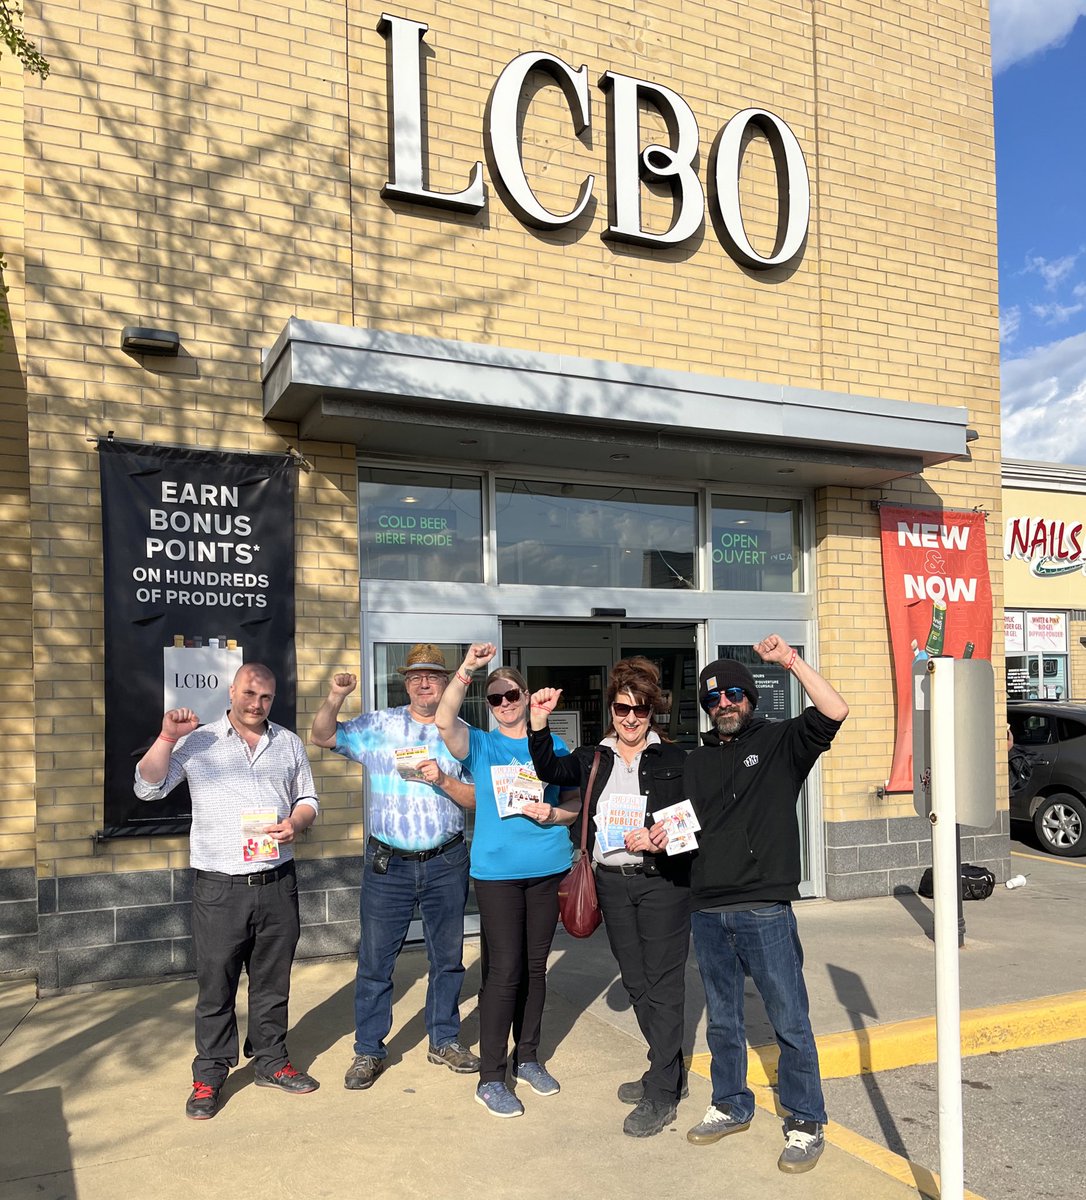 We had more great conversations today in St Catharines. We talked with grocery store workers, construction workers, teachers and folks between jobs! Everyone understood why @OPSEU is fighting to #KeepLCBOpublic, for fair wages & decent work. #Justice4Workers